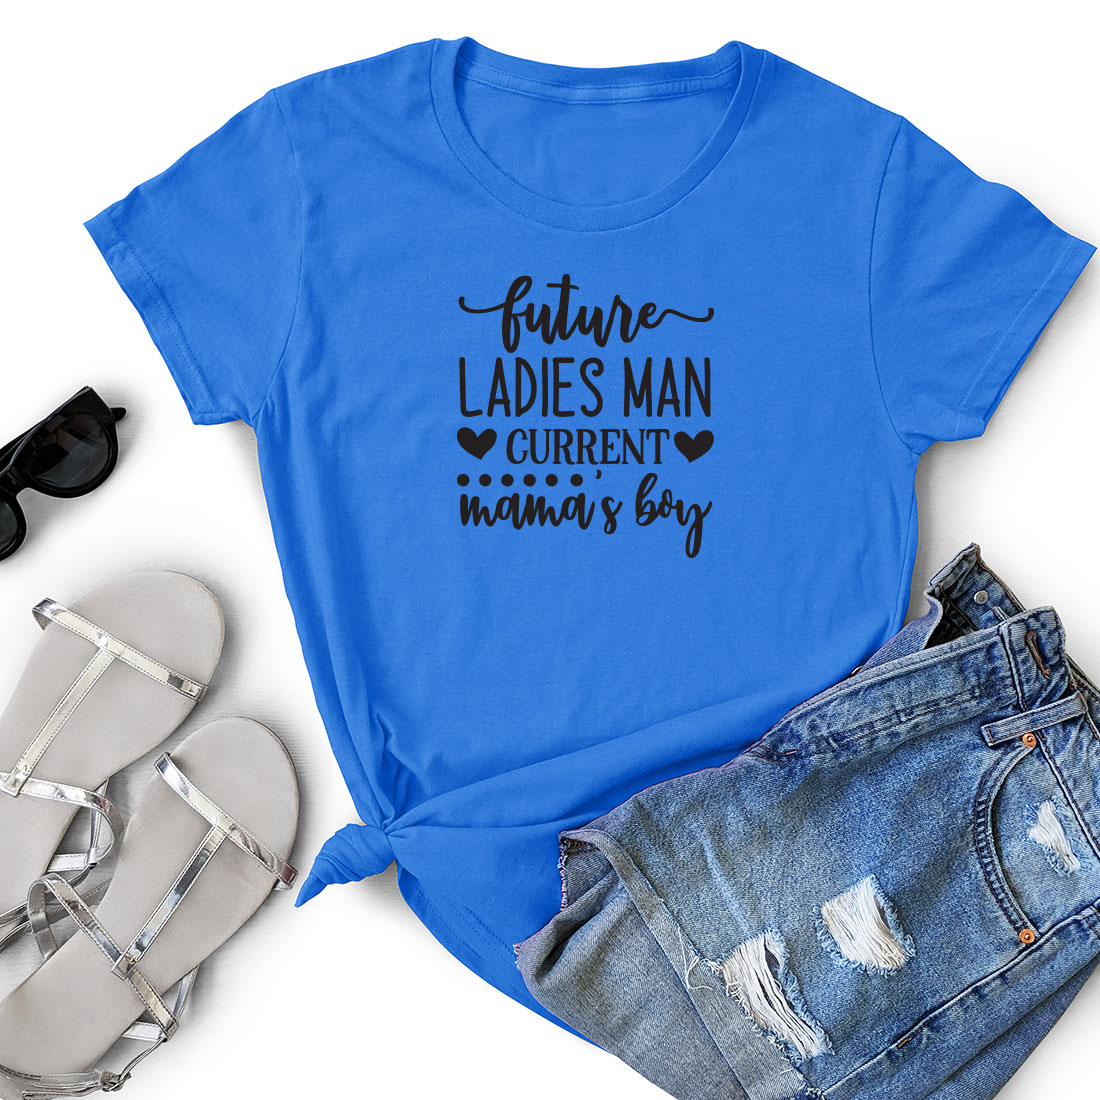 T - shirt that says future ladies man and a pair of shorts.